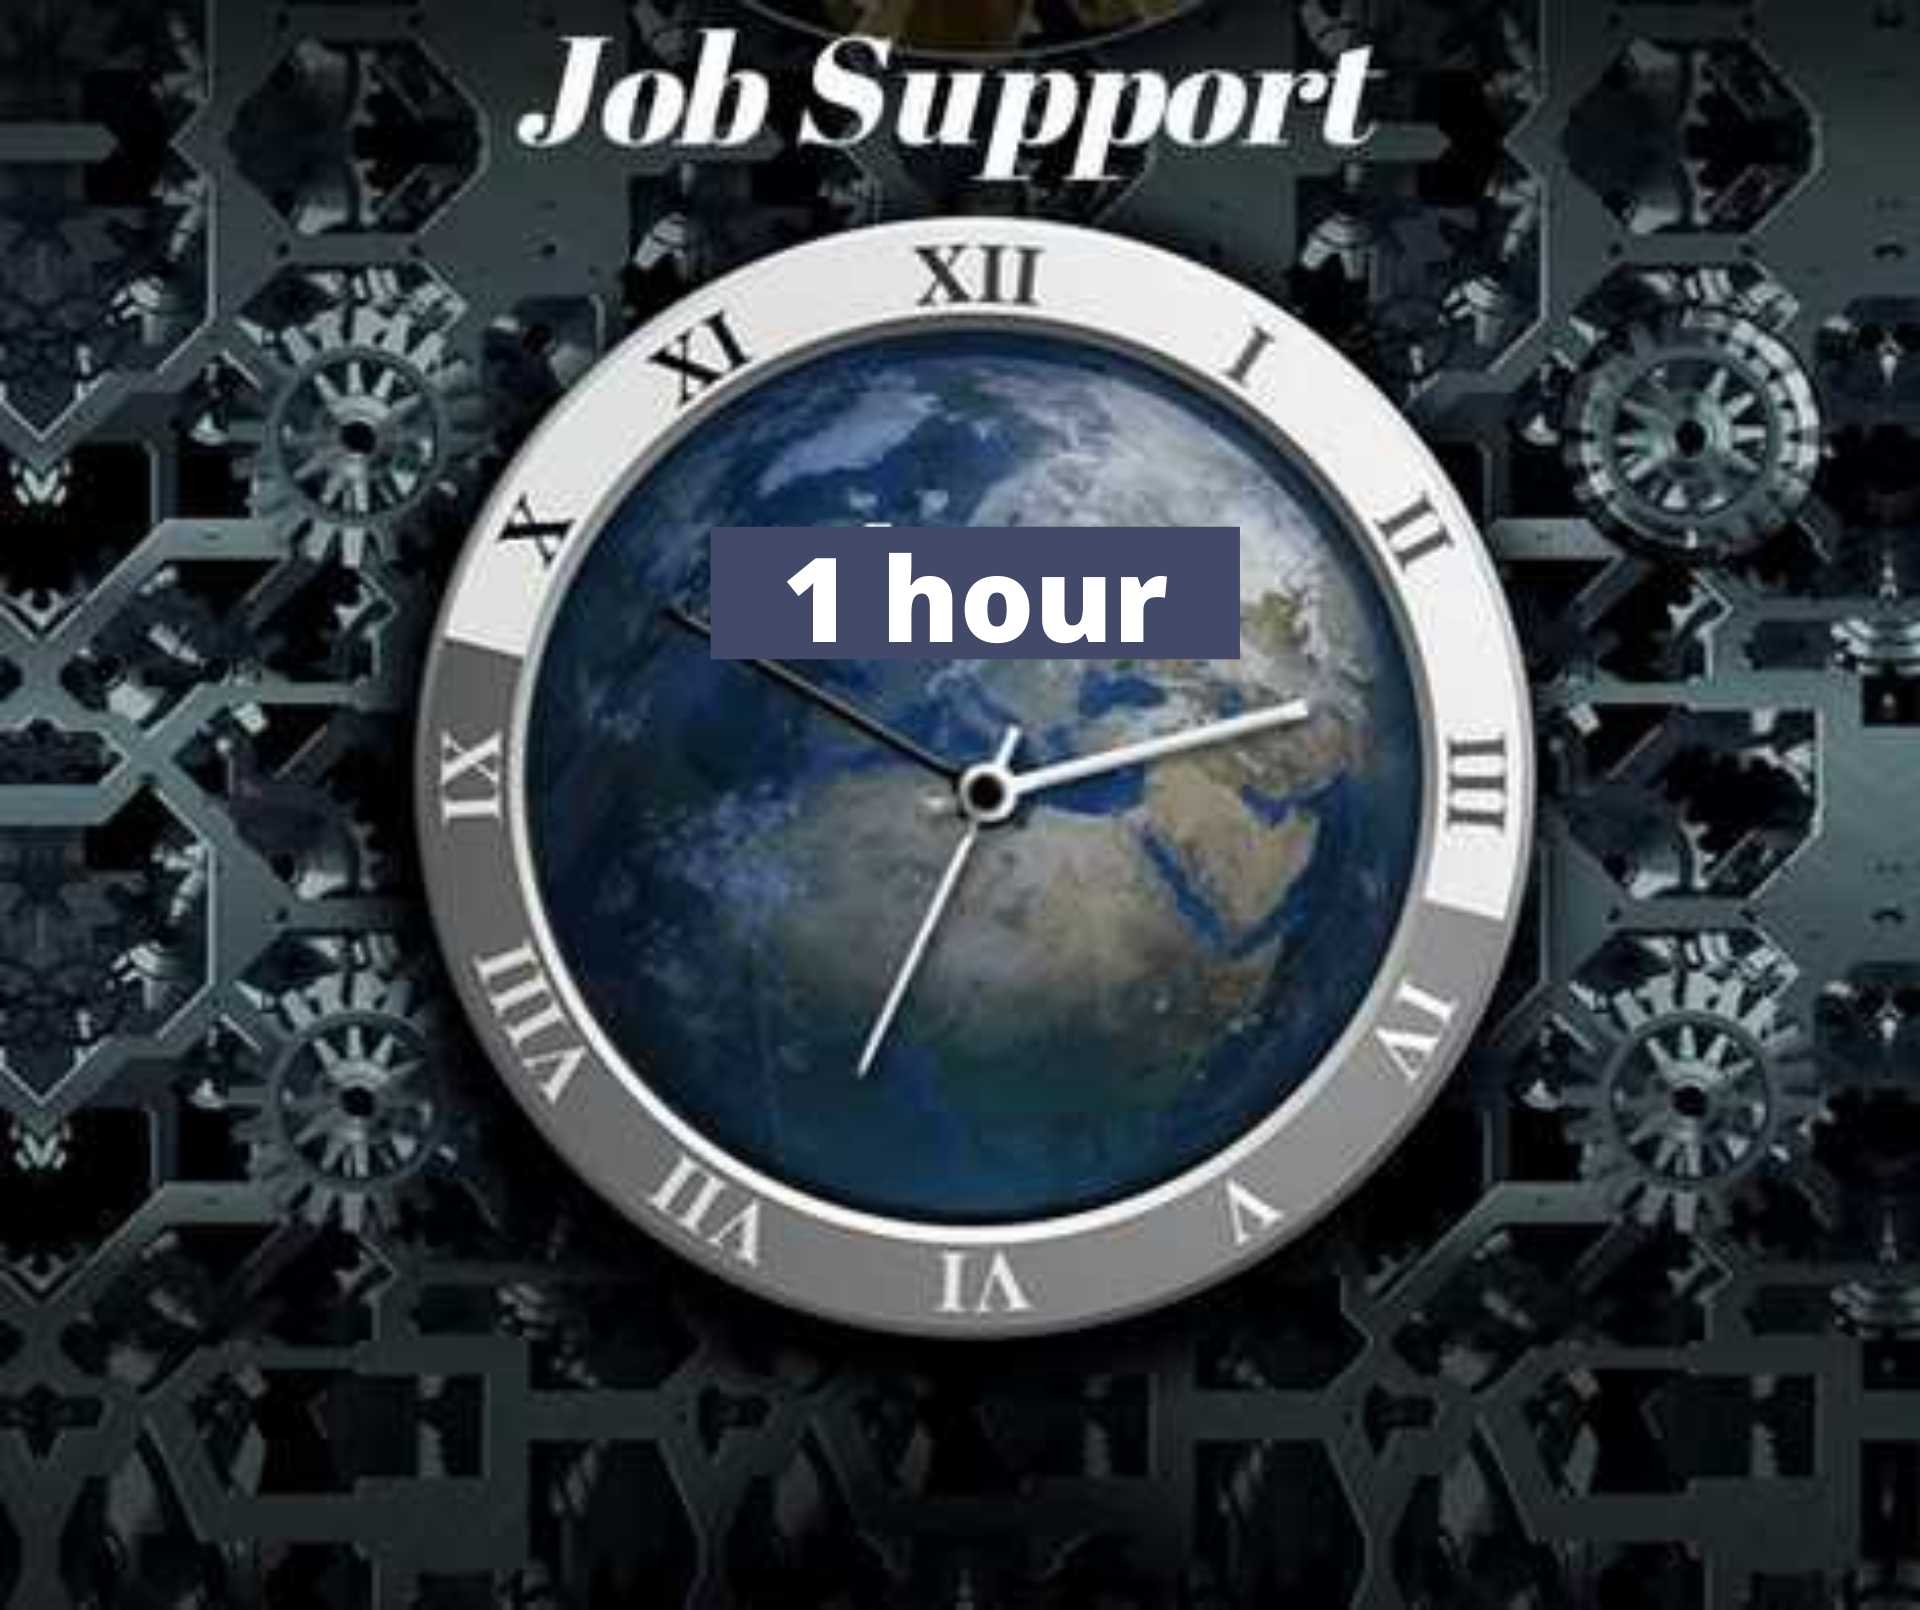 SAP Job support - 1 hour course and certification